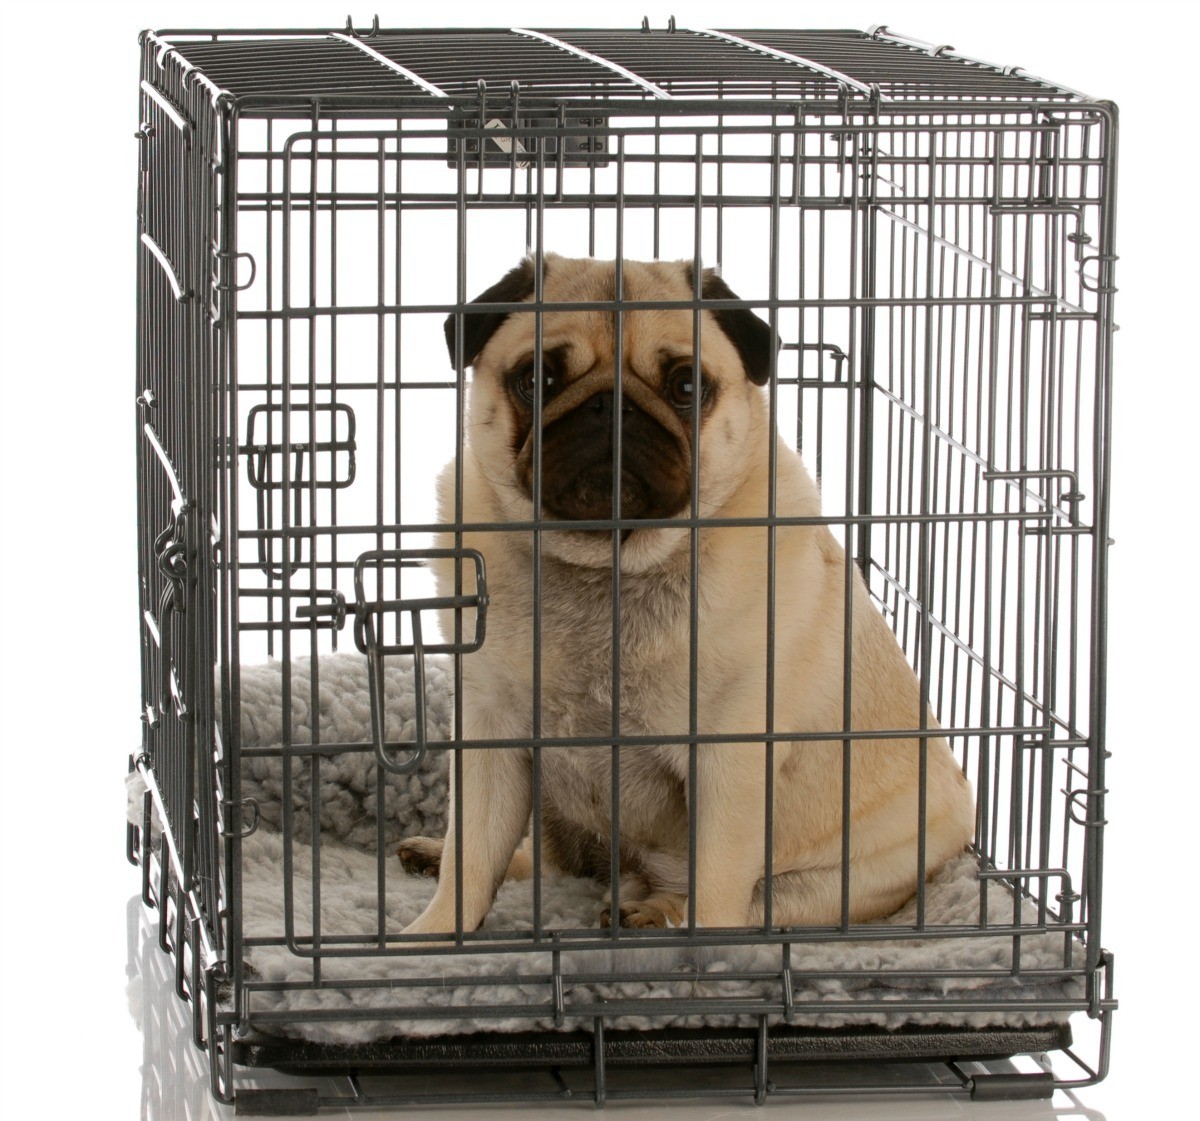 dog urinating in crate